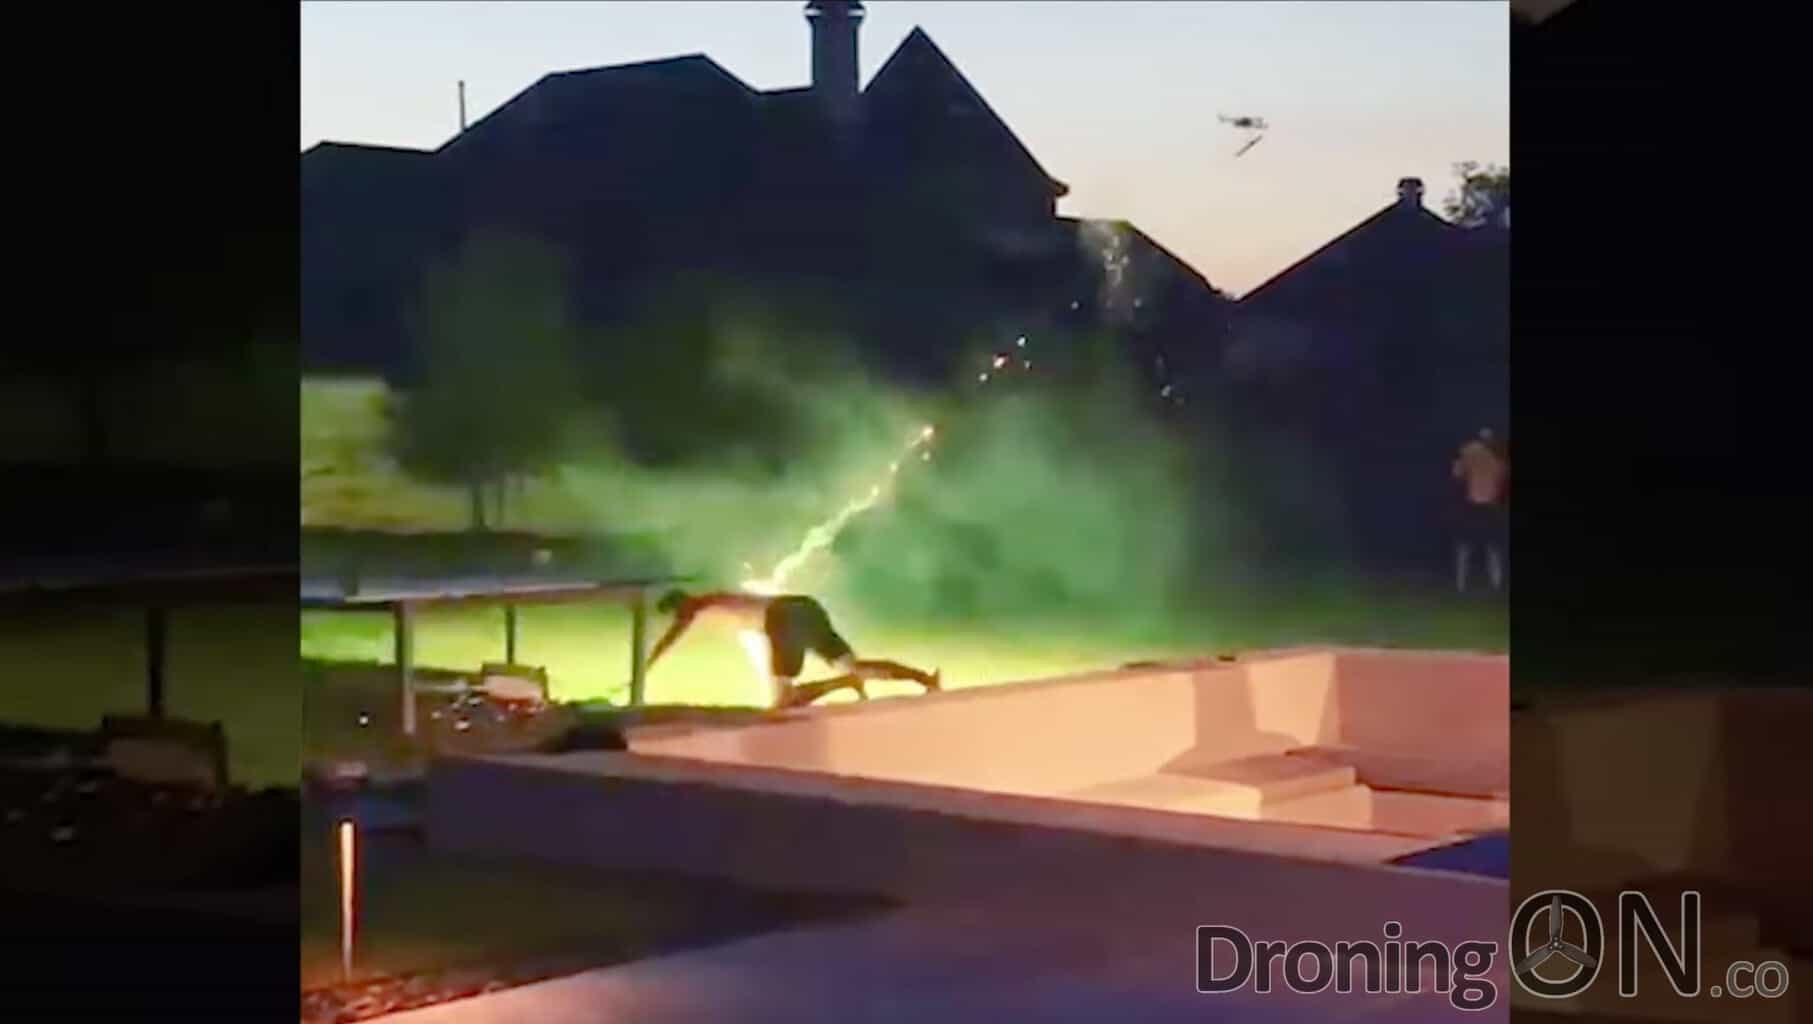 A Texan called Zack Myers recently uploaded this Instagram video of a DJI Mavic launching fireworks at drunk individuals.